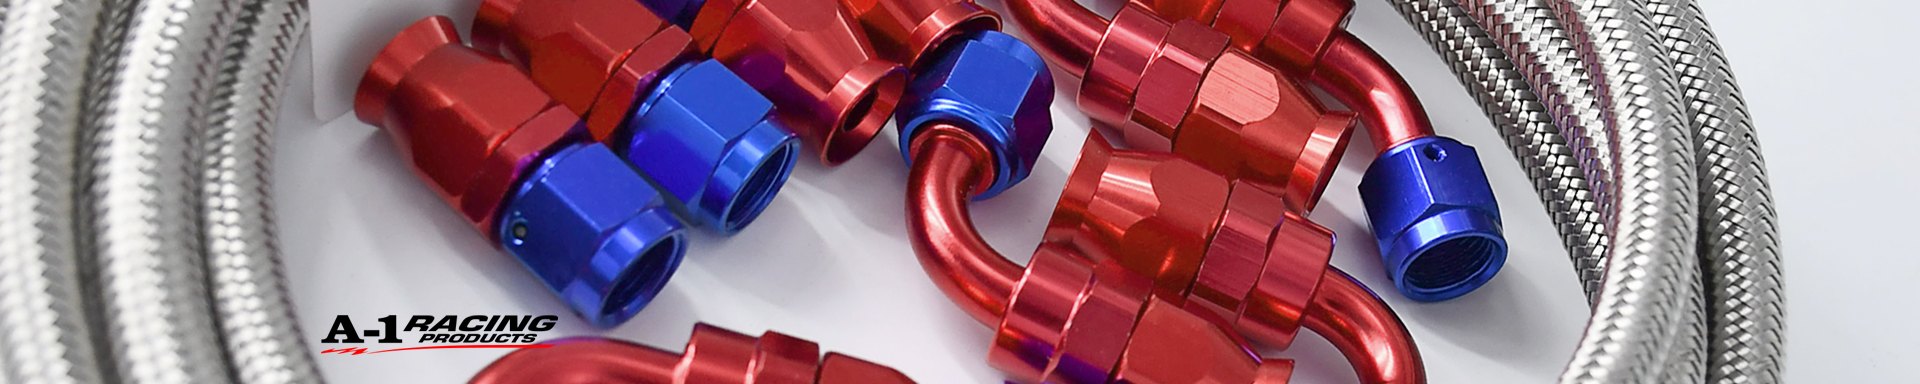 A-1 Racing Fittings, Lines & Hoses